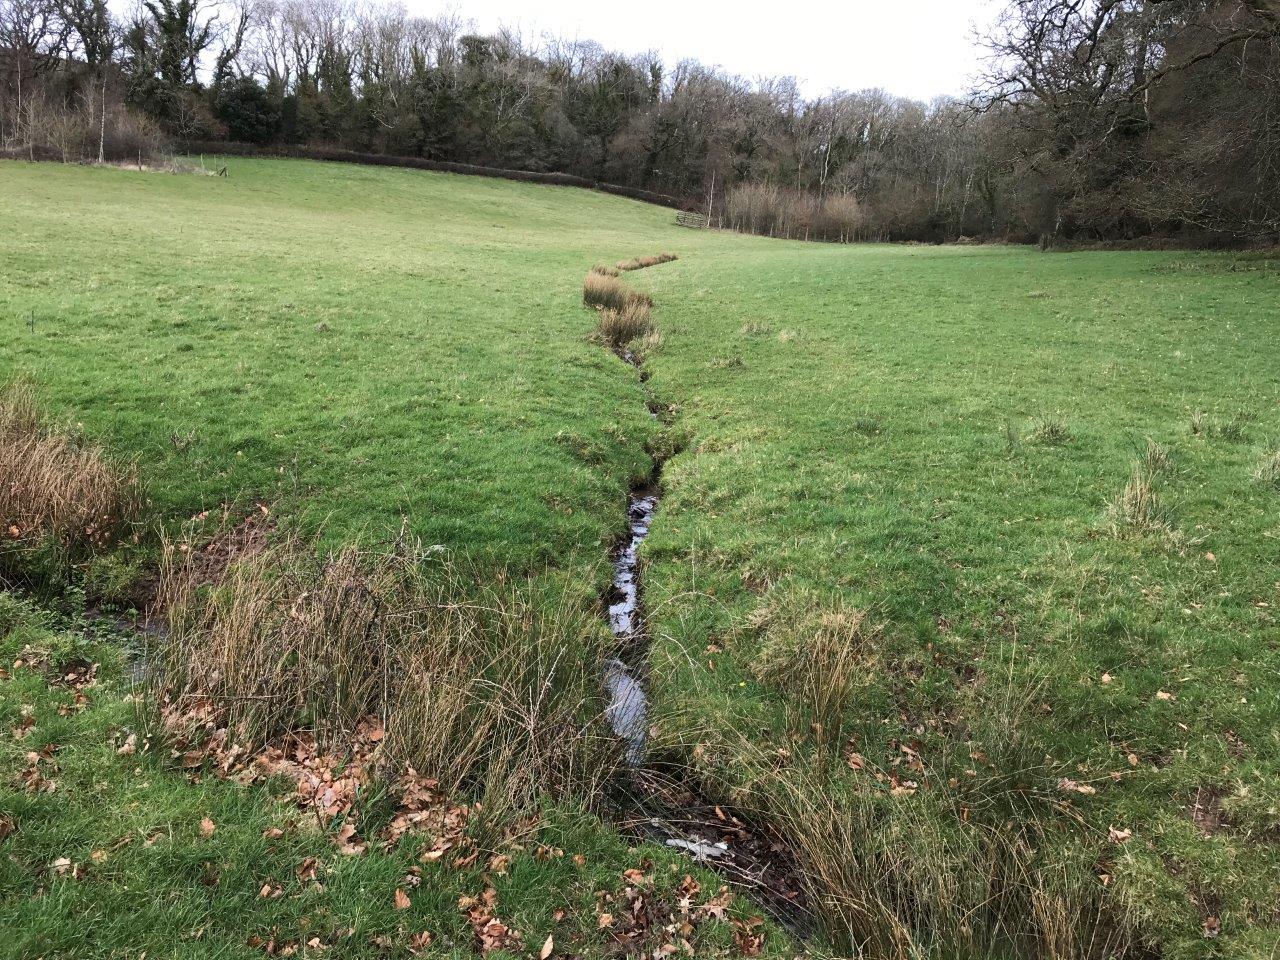 One of the tributaries through the landscape which has been drained and intensively grazed in the past (National Trust/PA)